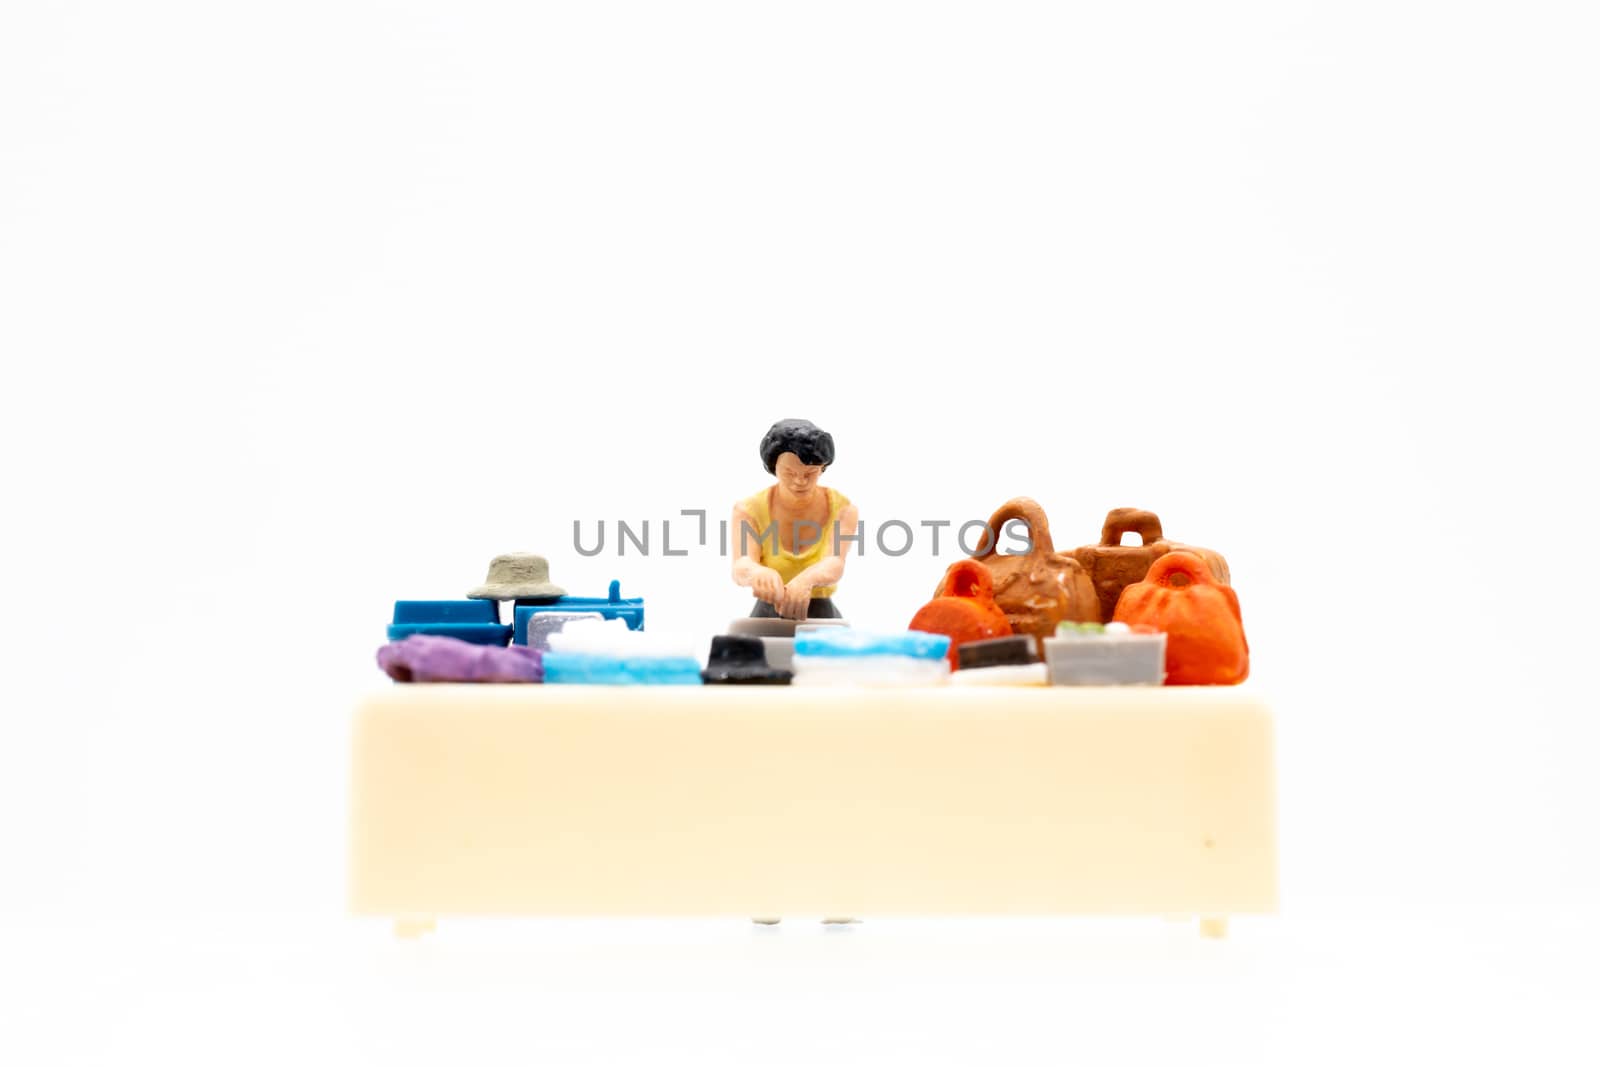 Miniature people standing on white background and space for text